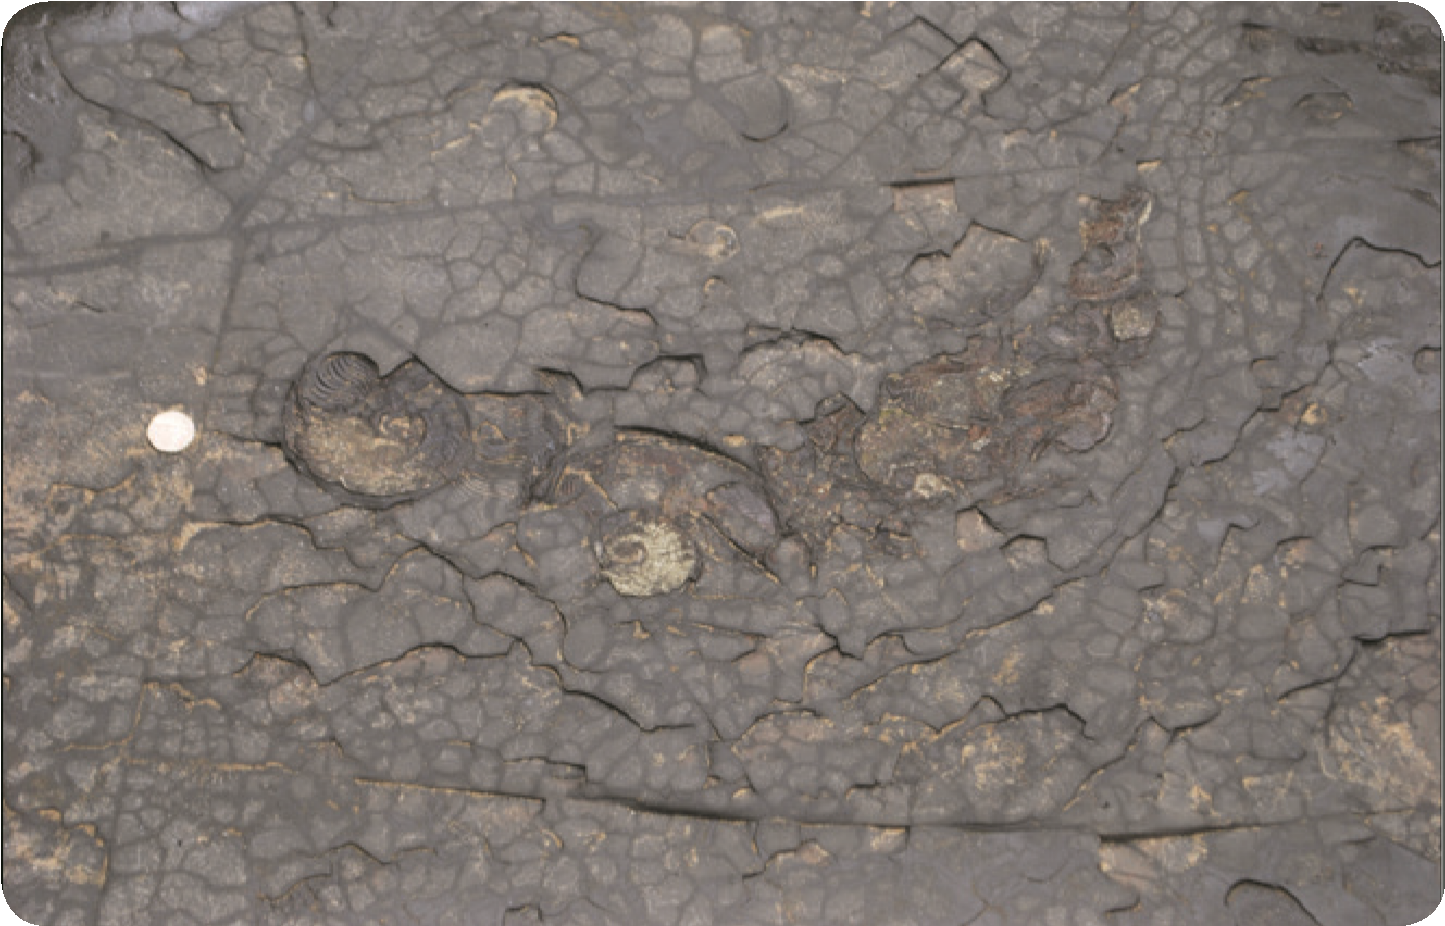 Crushed specimens of the ammonite <i>Harpoceras</i> preserved in pyrite in the basal beds of the Bituminous Shales.